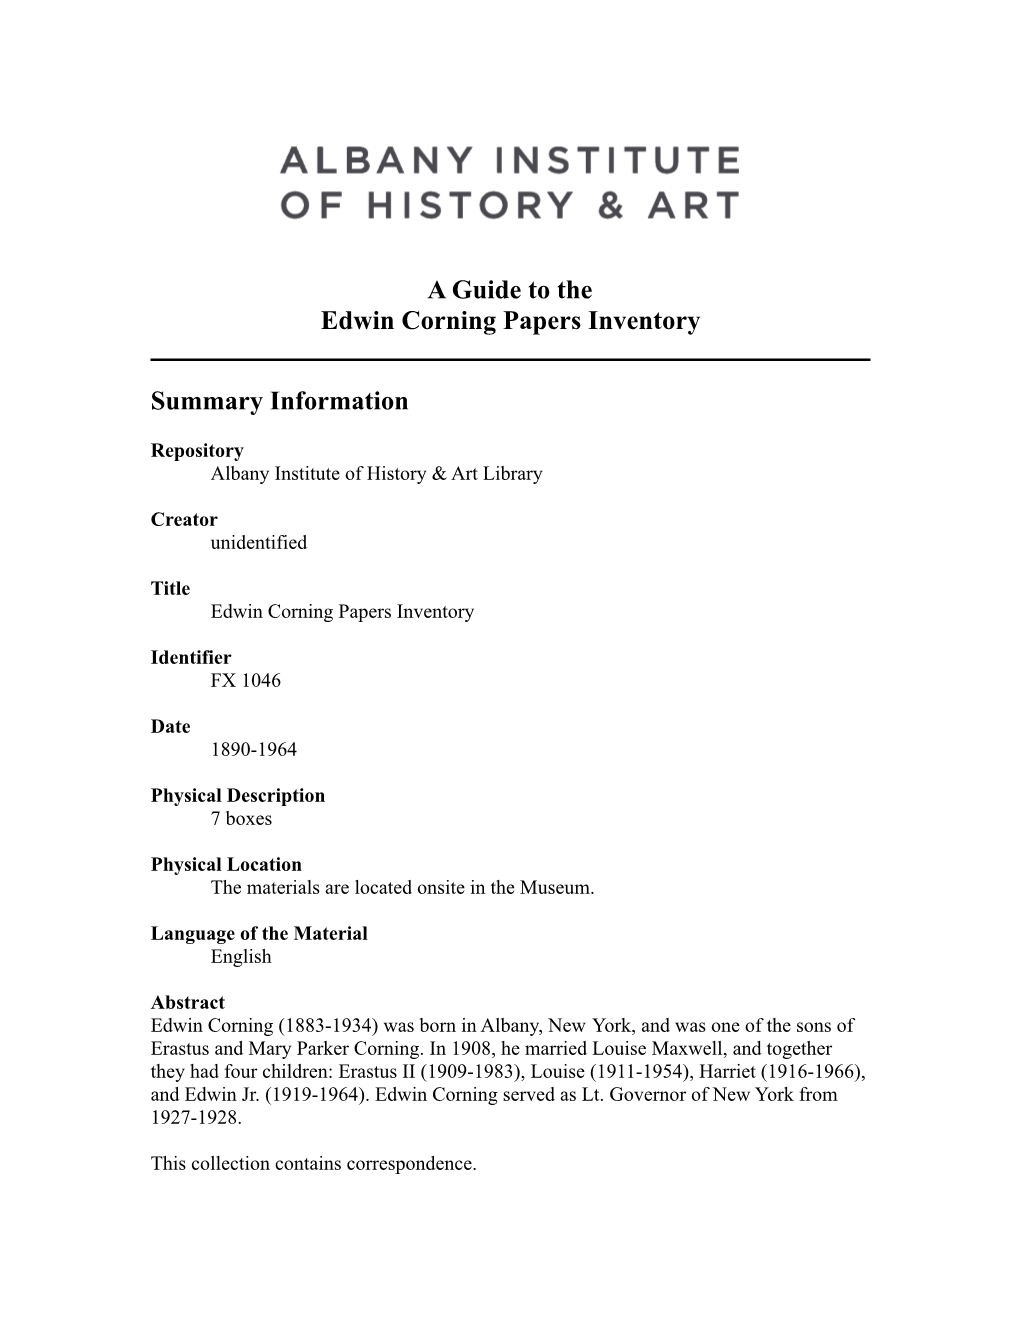 Edwin Corning Papers Inventory, 1890-1964, FX 1046